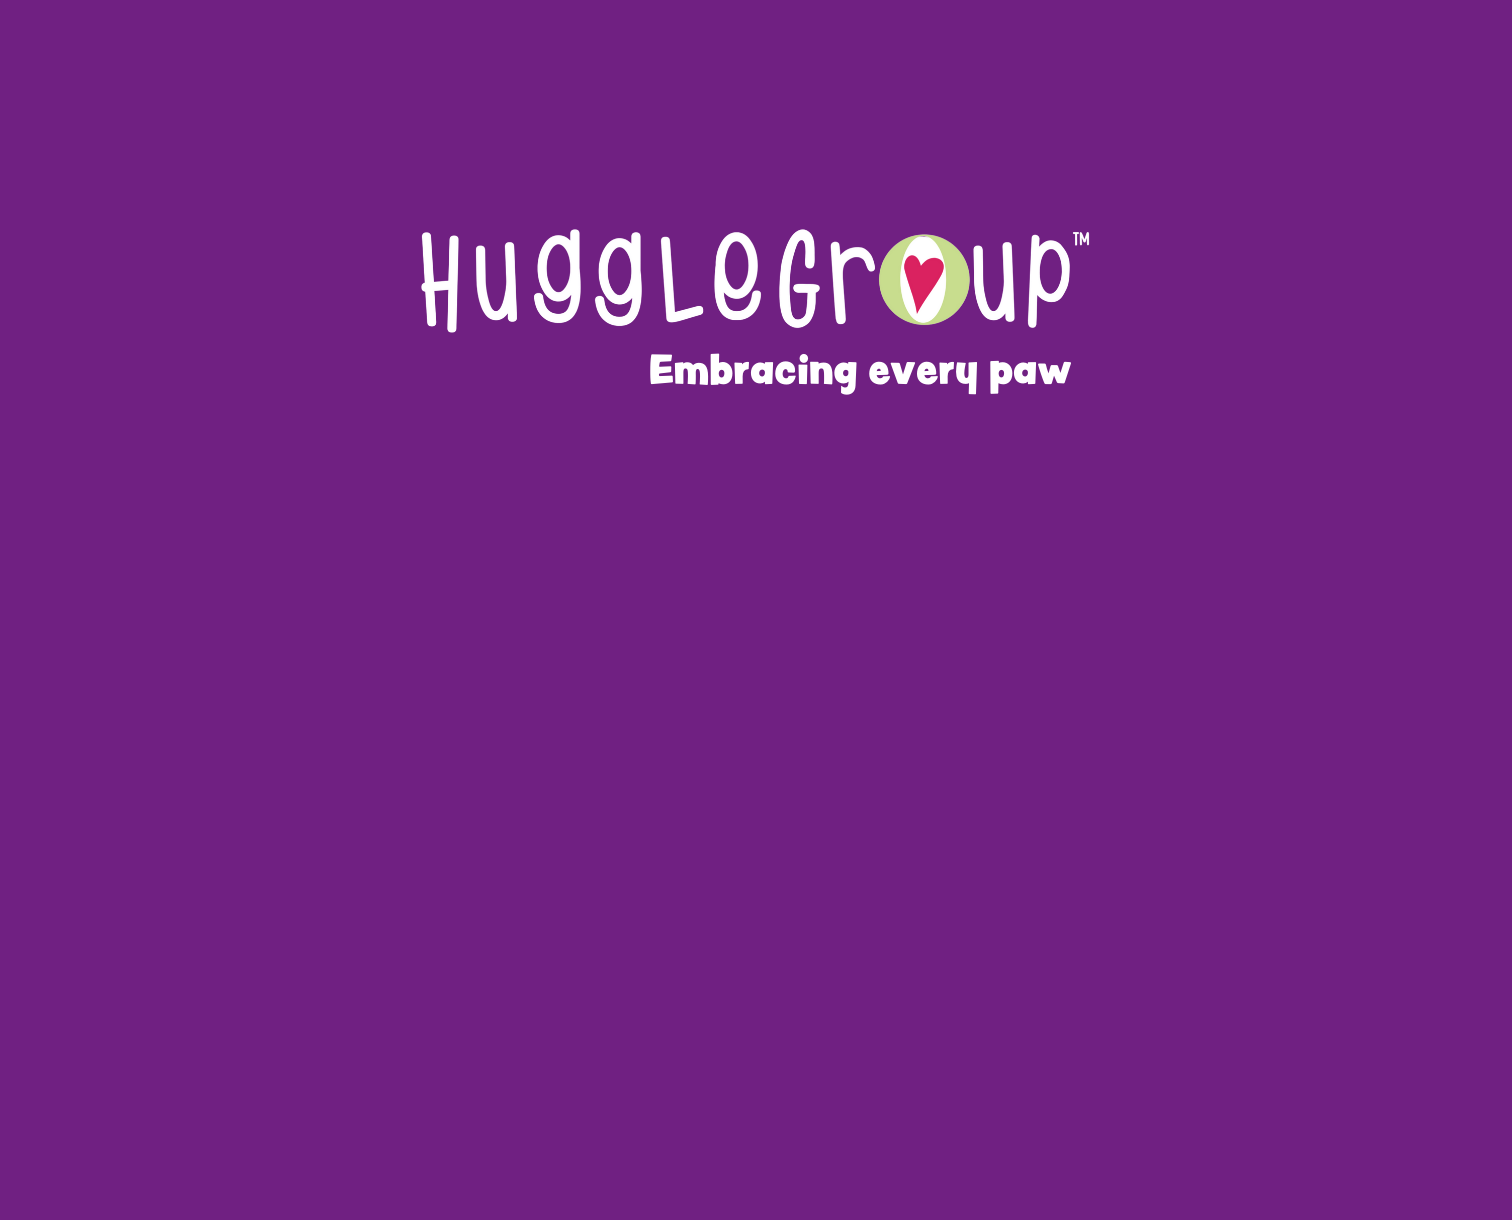 Purple background with HuggleGroup™ logo and tagline "Embracing every paw".